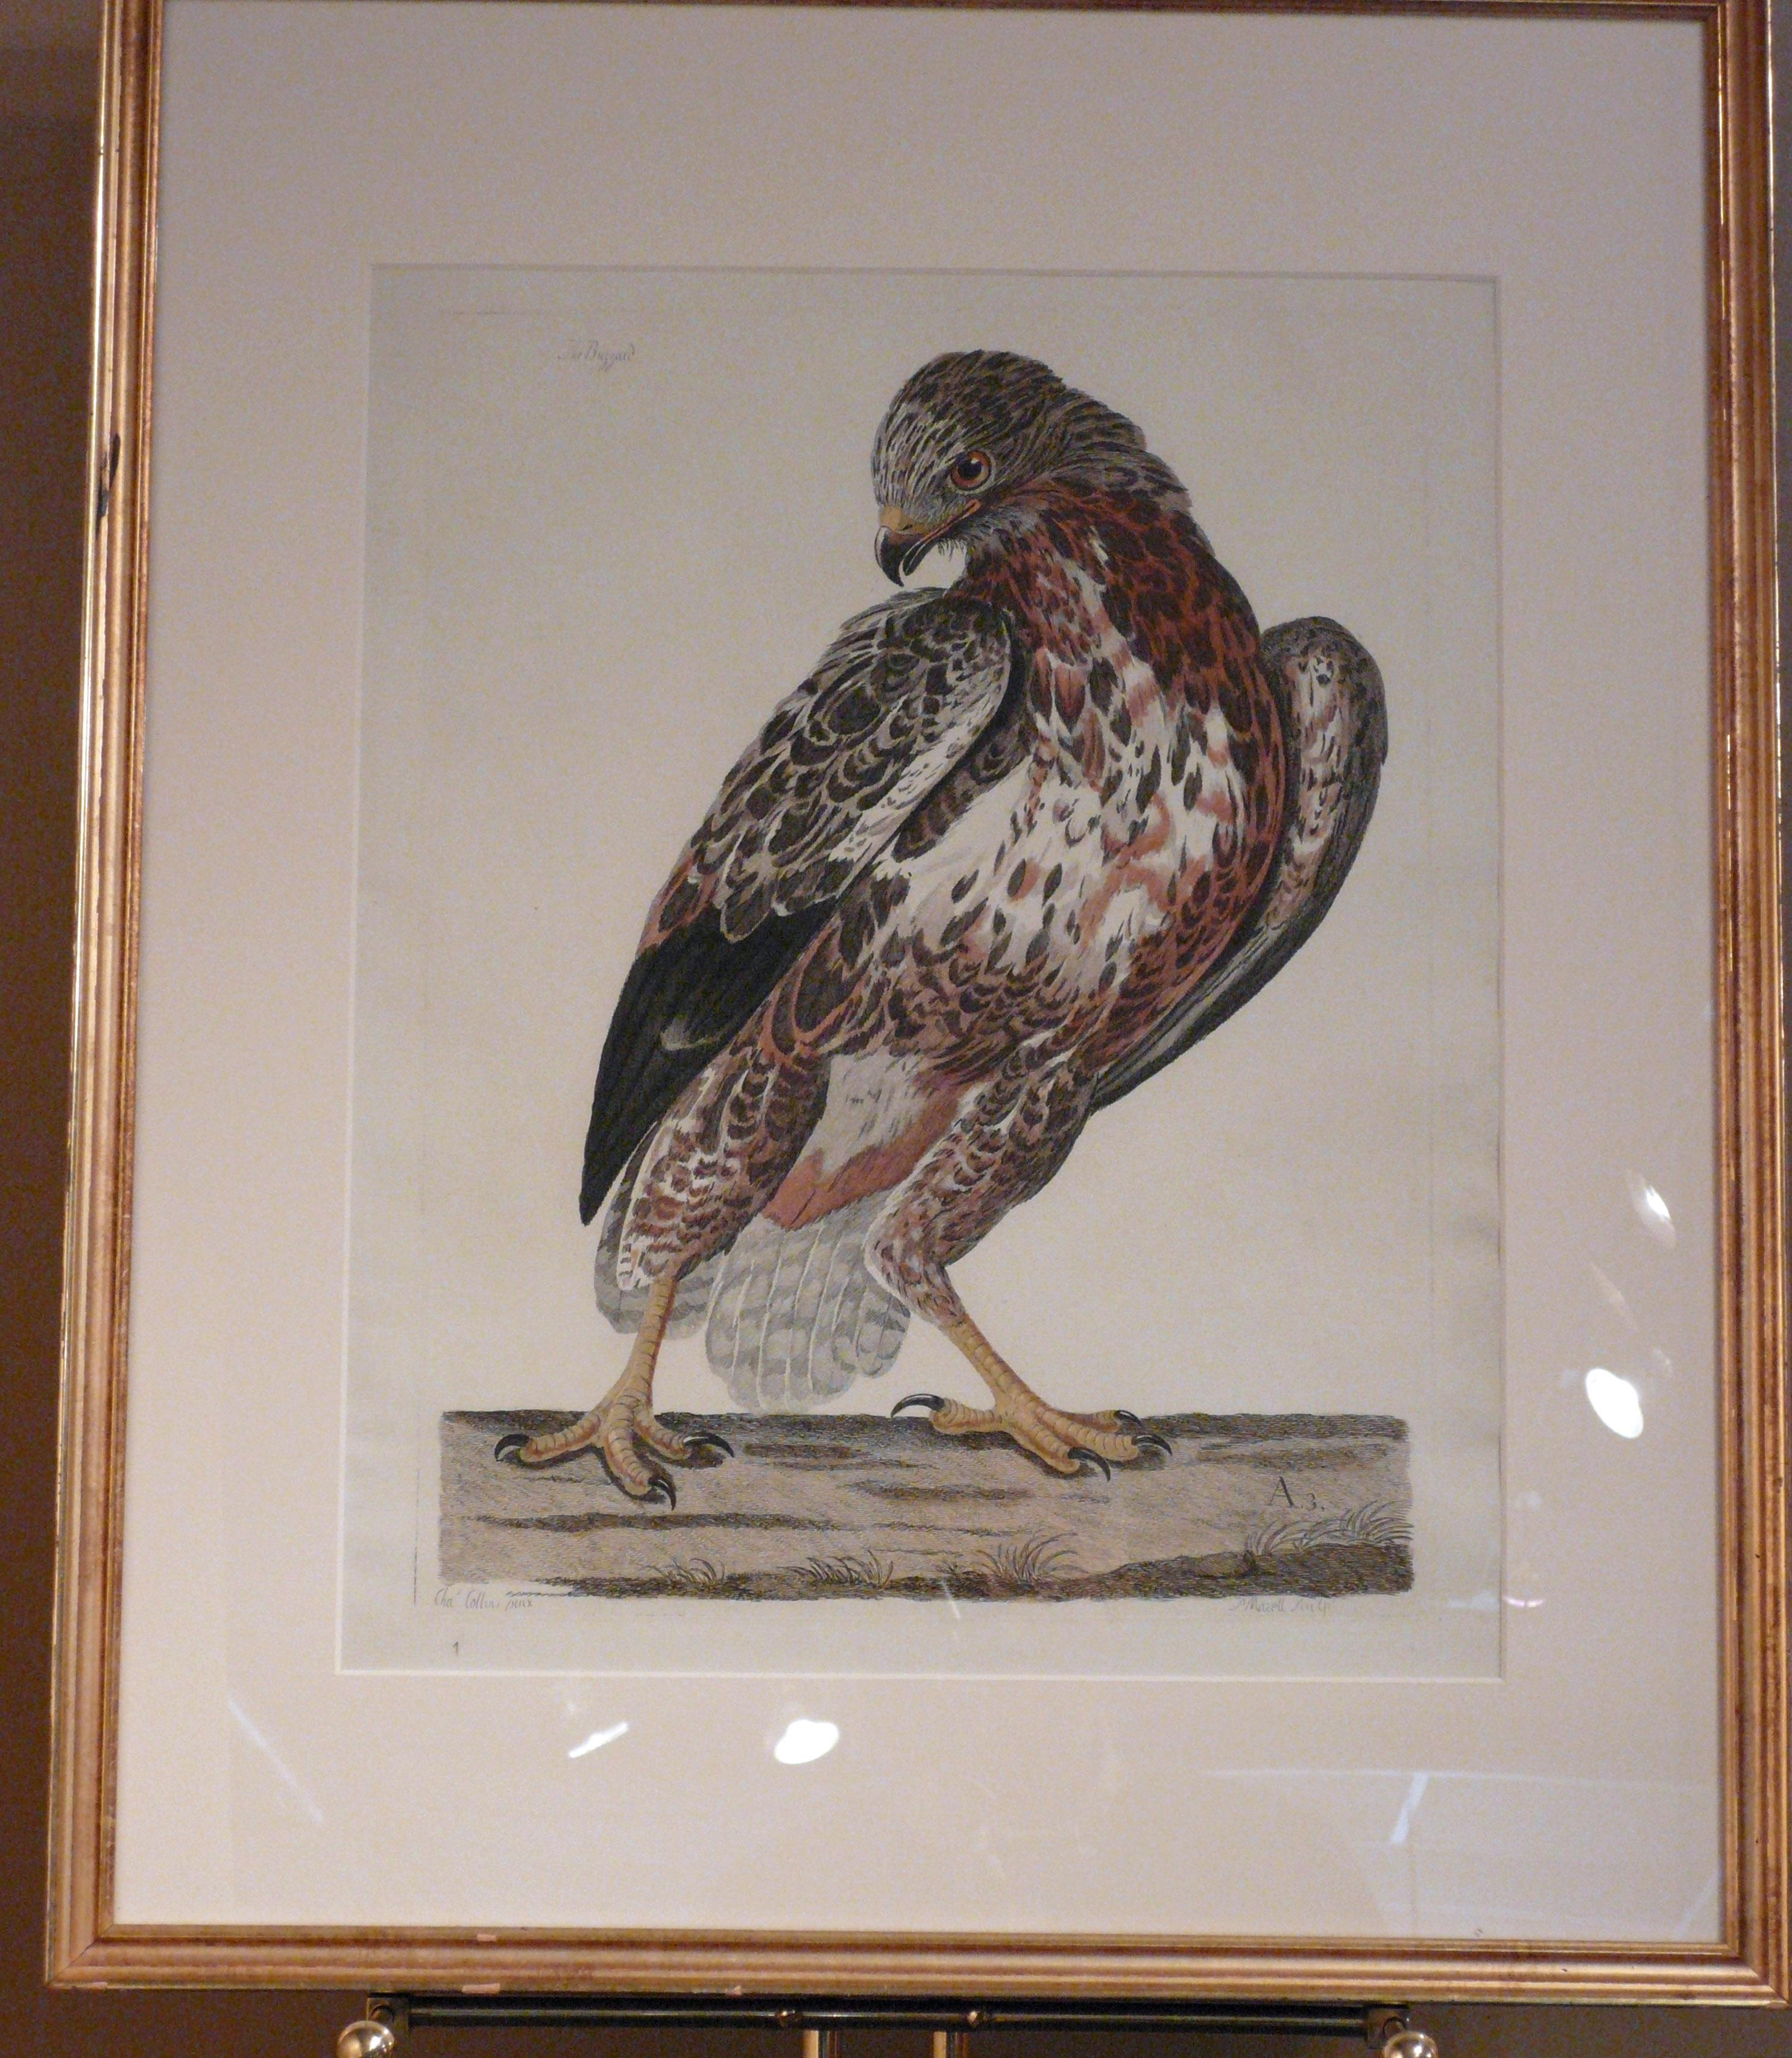 THE COMMON BUZZARD  - Print by Peter Mazel